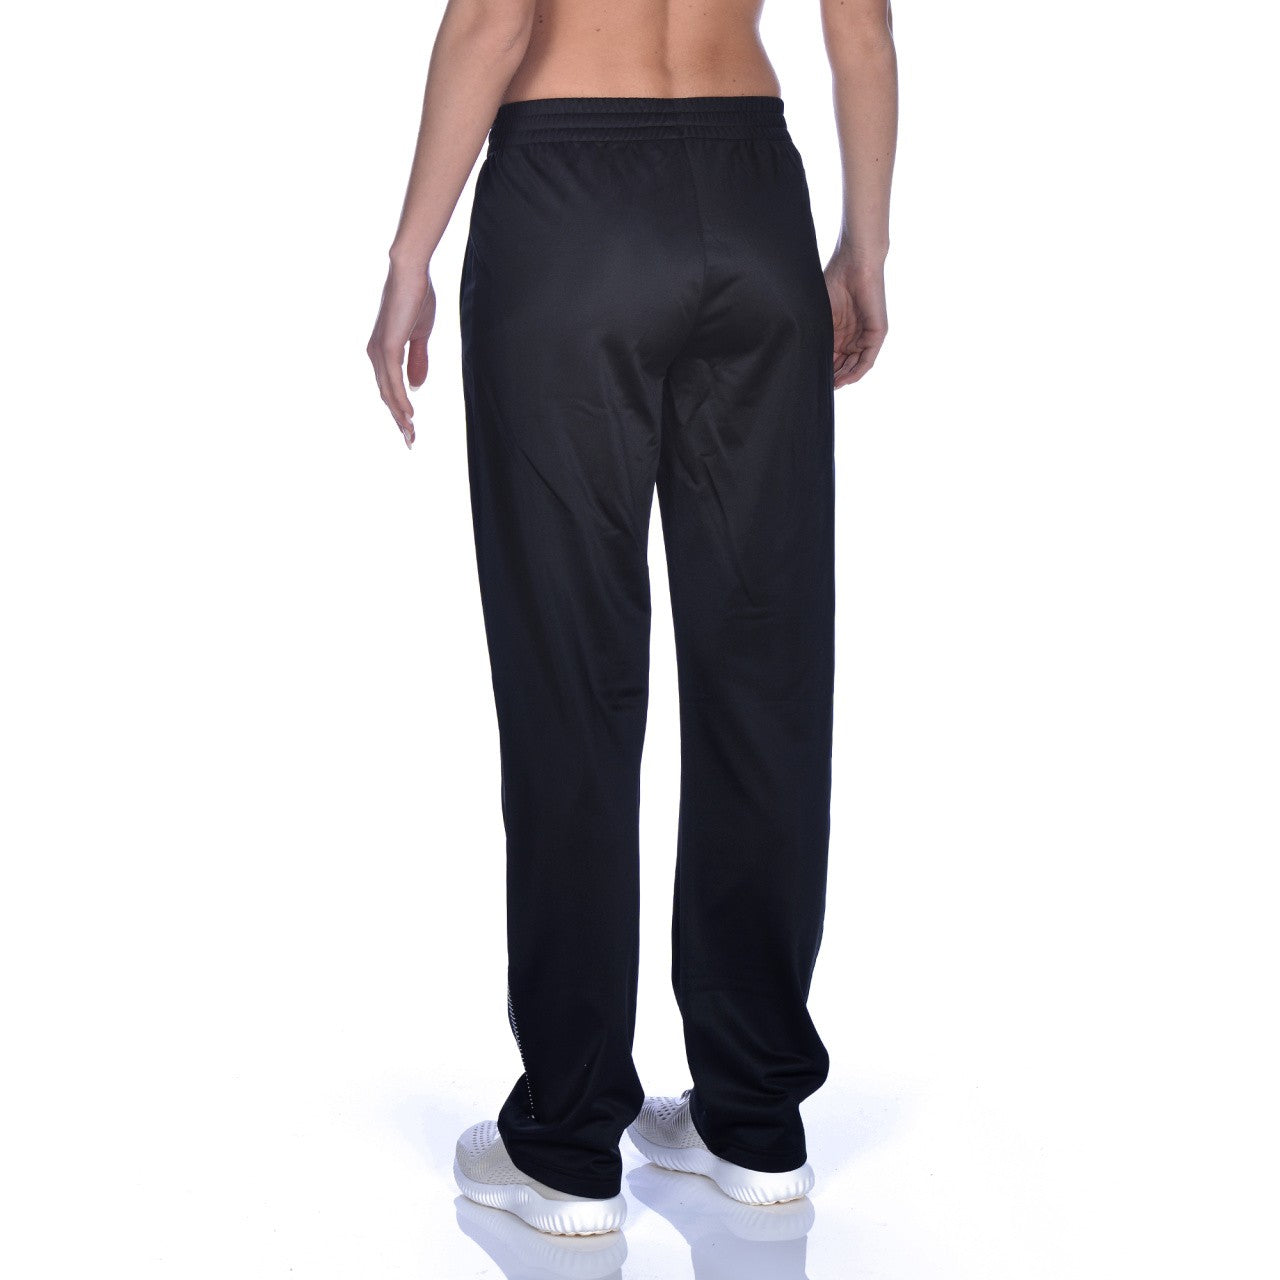 Tl Knitted Poly Pant black